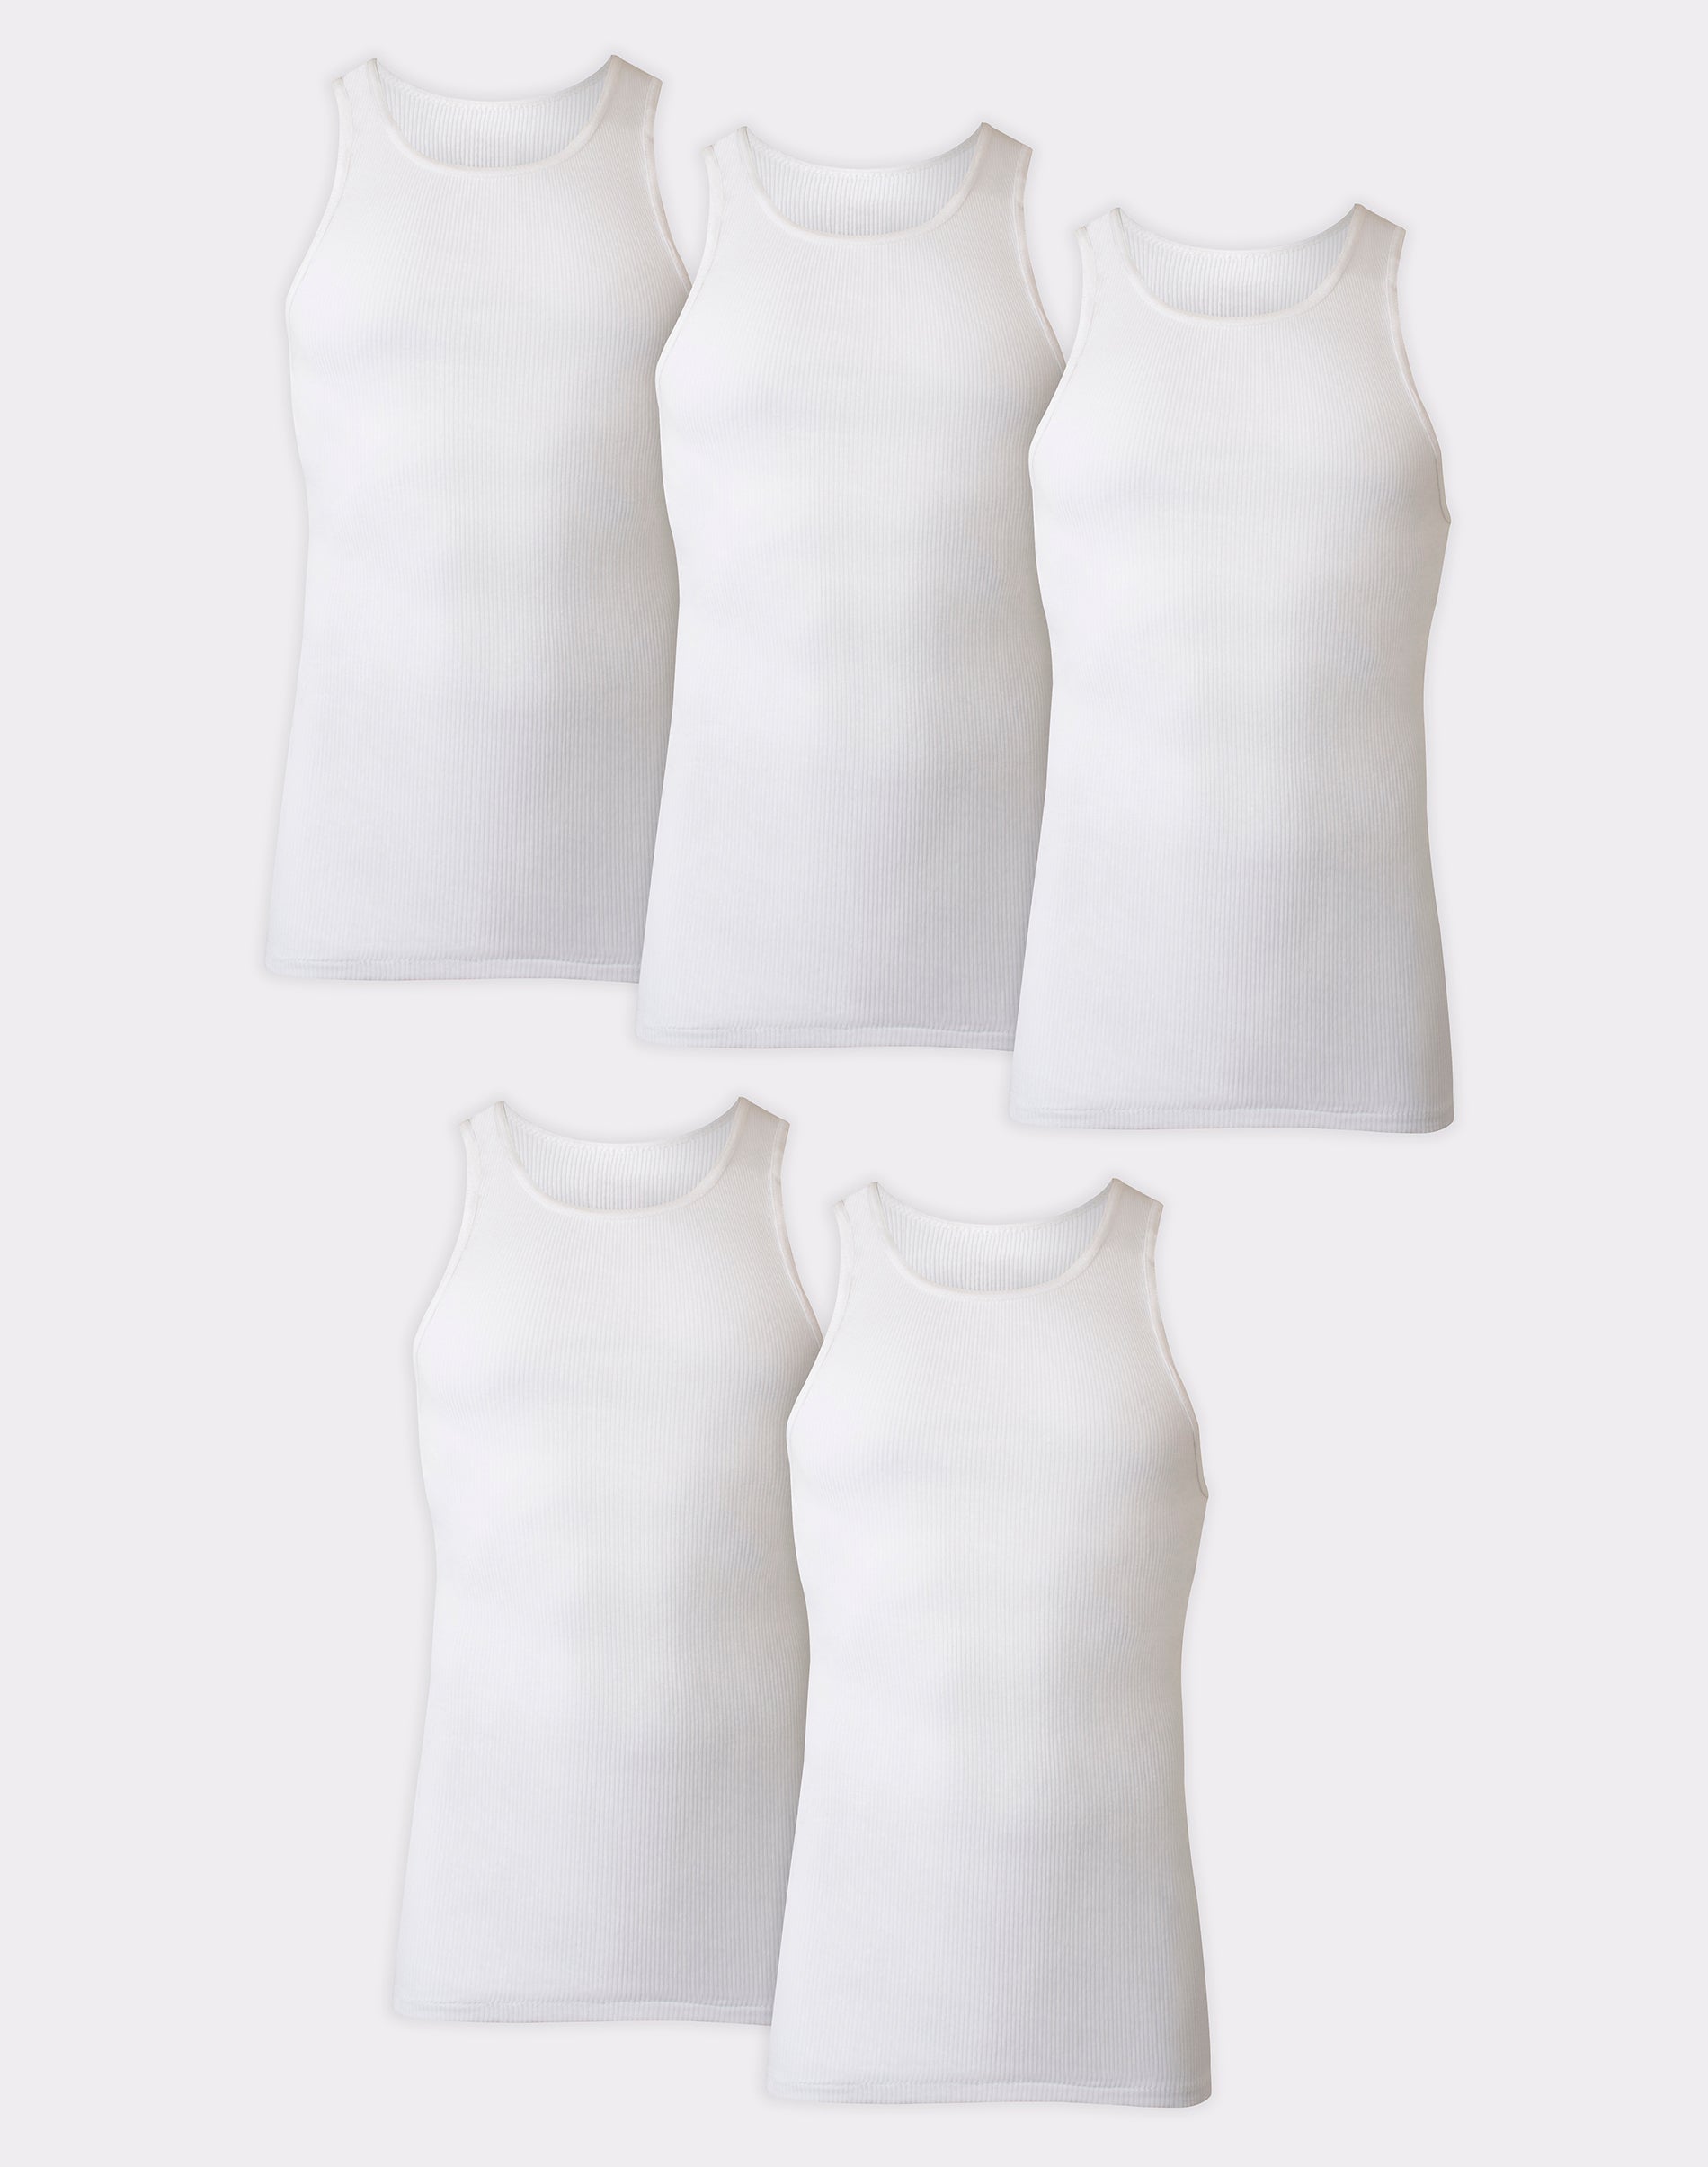 Hanes Ultimate Big Men's White Tank Top Undershirt Pack, 100% Cotton, 5-Pack (Big & Tall Sizes)